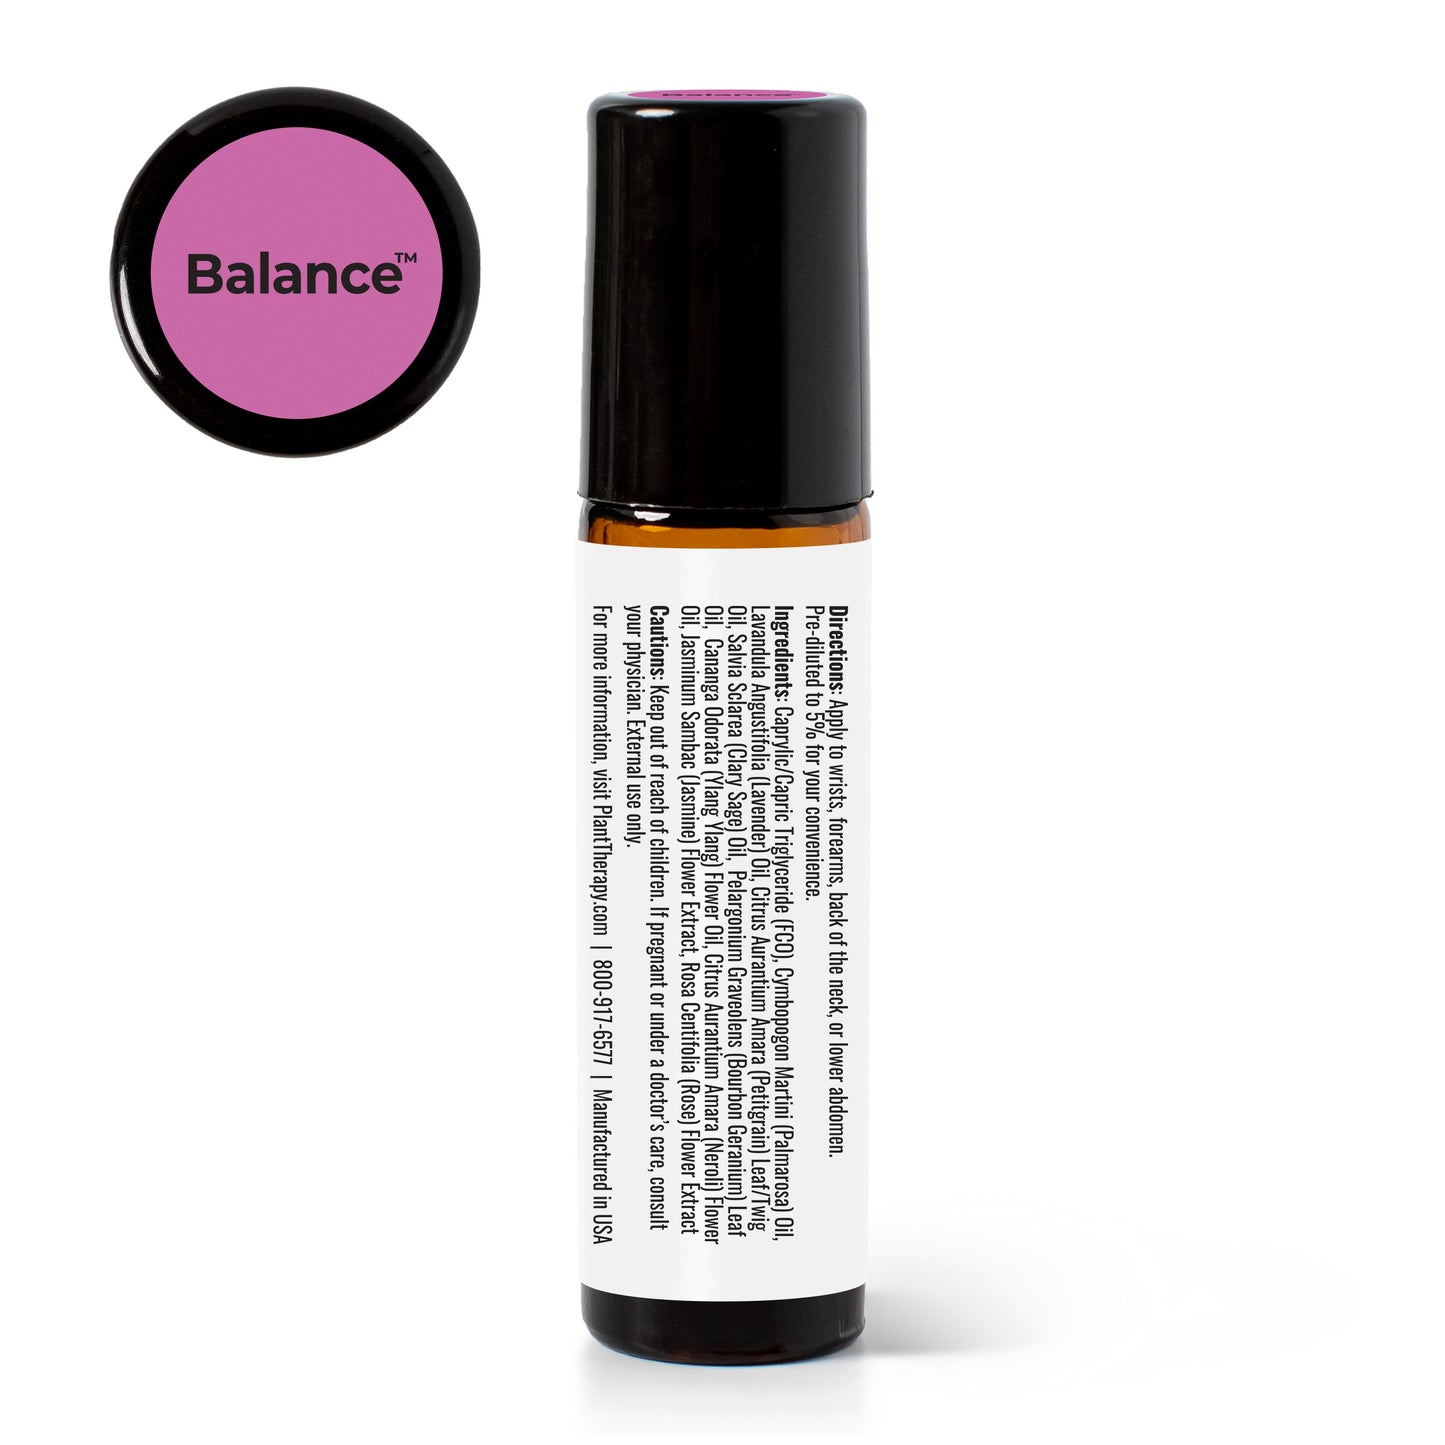 Balance Essential Oil Blend Pre-Diluted Roll-On